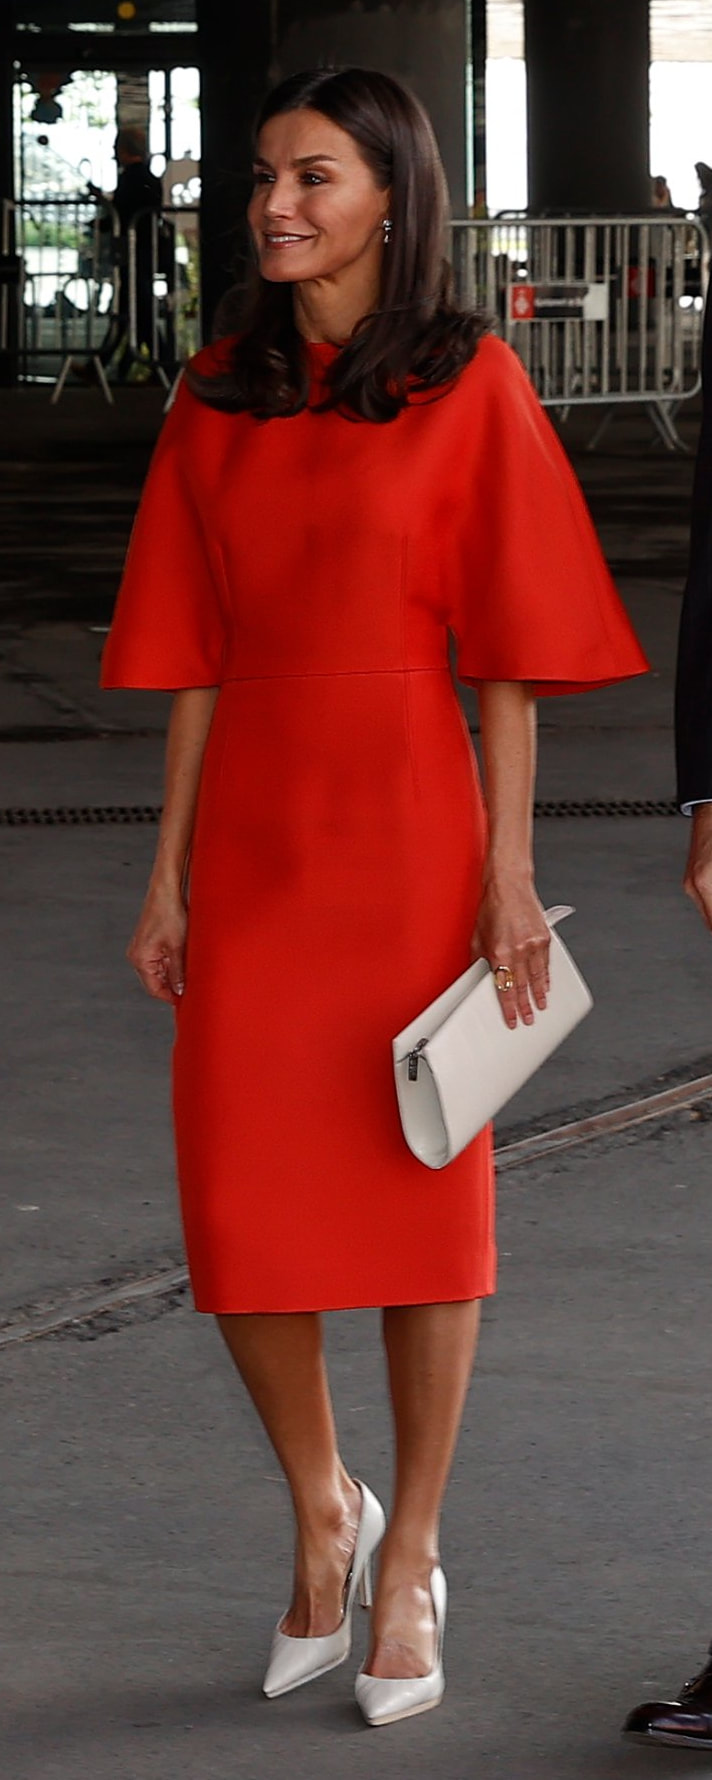 Magrit Lea Clutch​ as carried by Queen Letizia